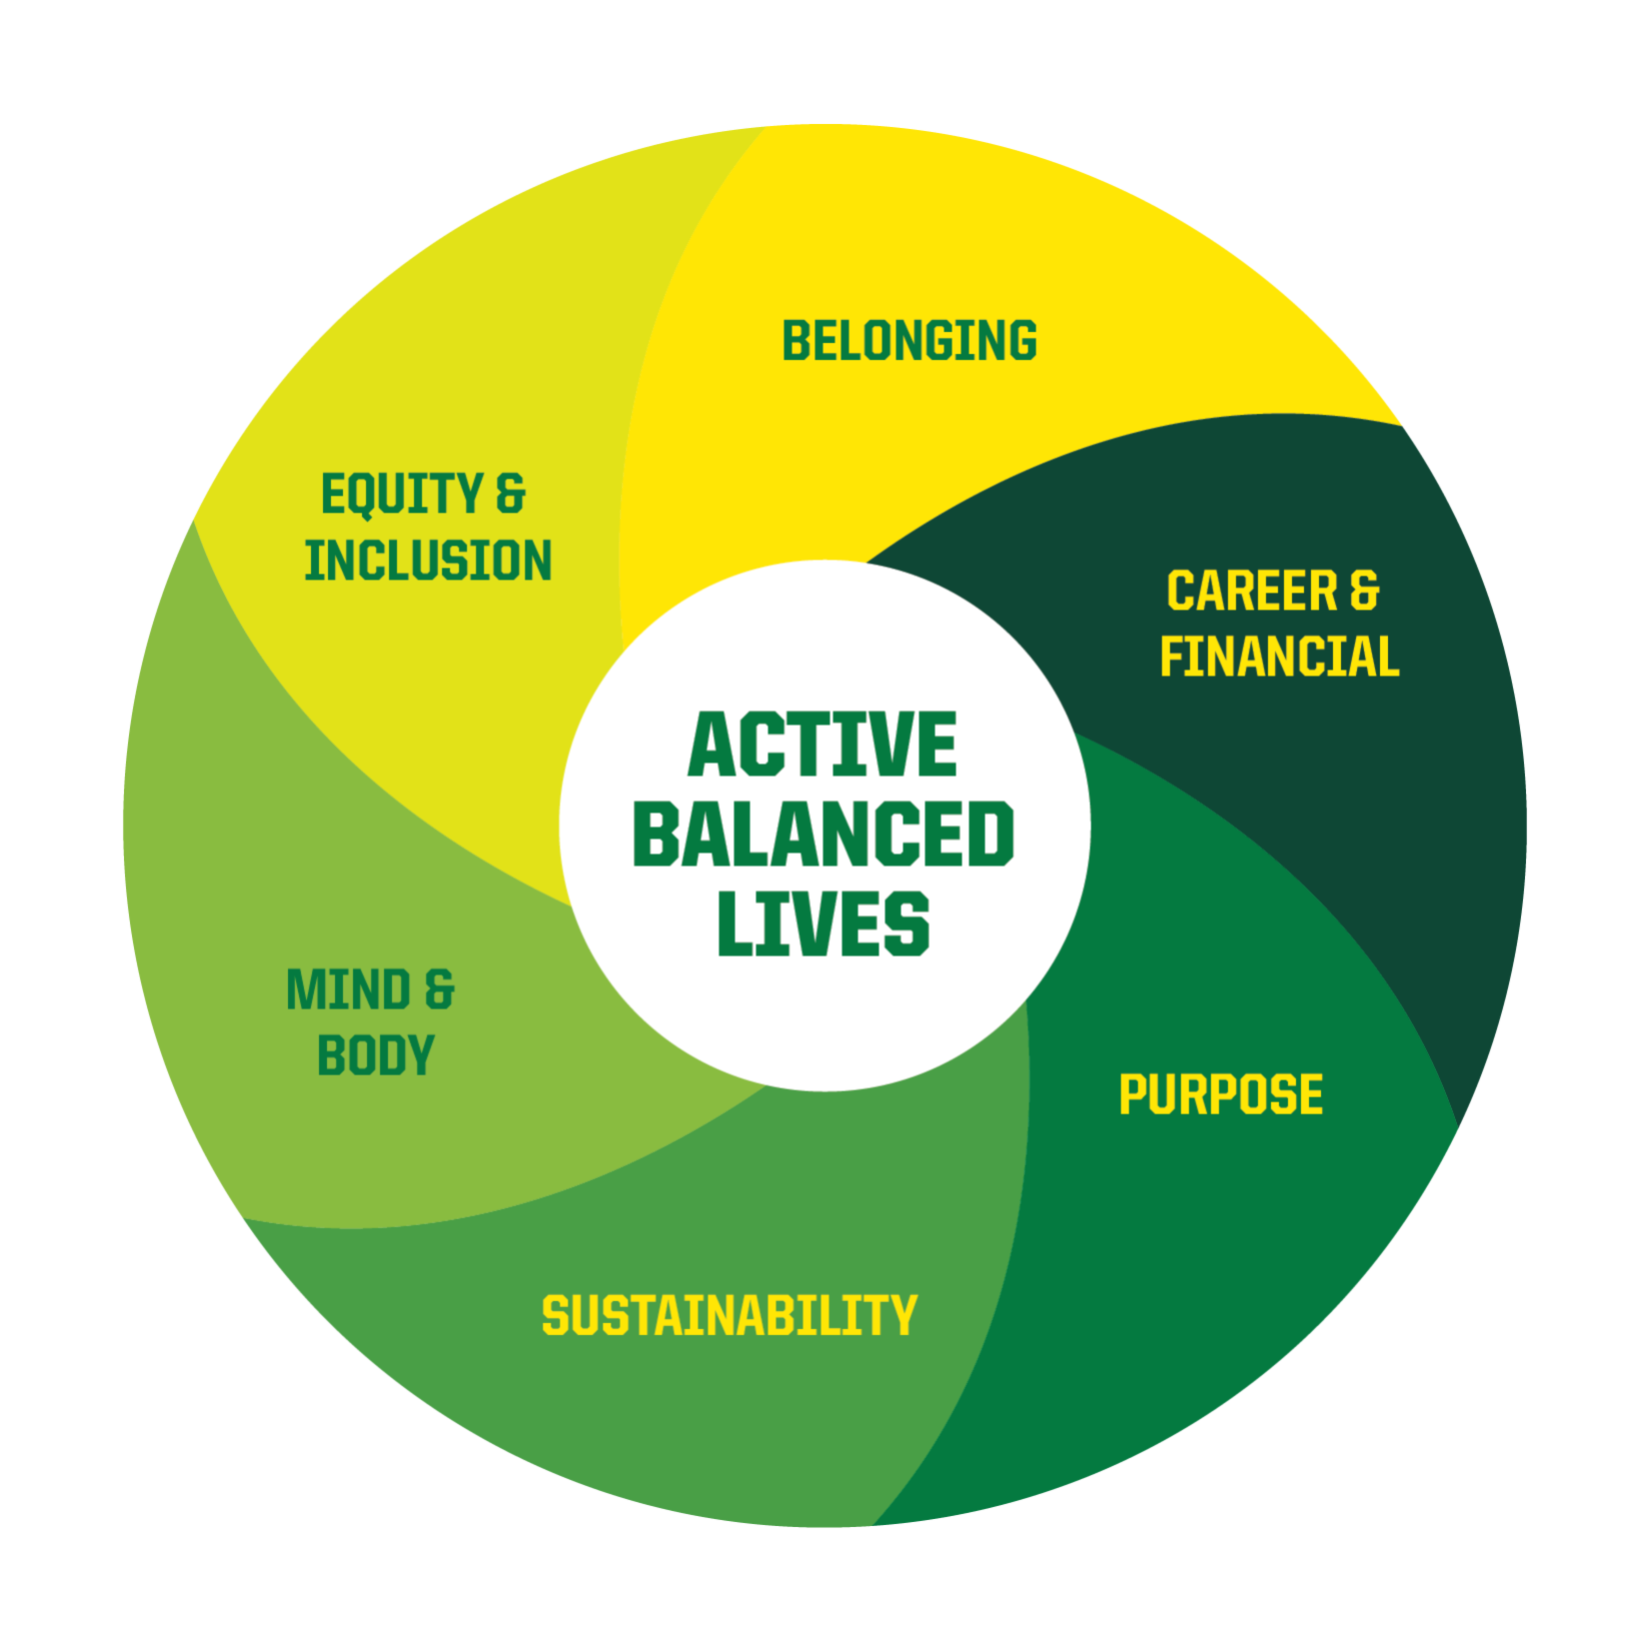 Graphic that illustrates the model of Holistic Well-being, with Active Balanced Lives in the center, surrounded by the six domains of Mind and Body, Equity and Inclusion, Belonging, Career and Financial, Purpose, and Sustainability.